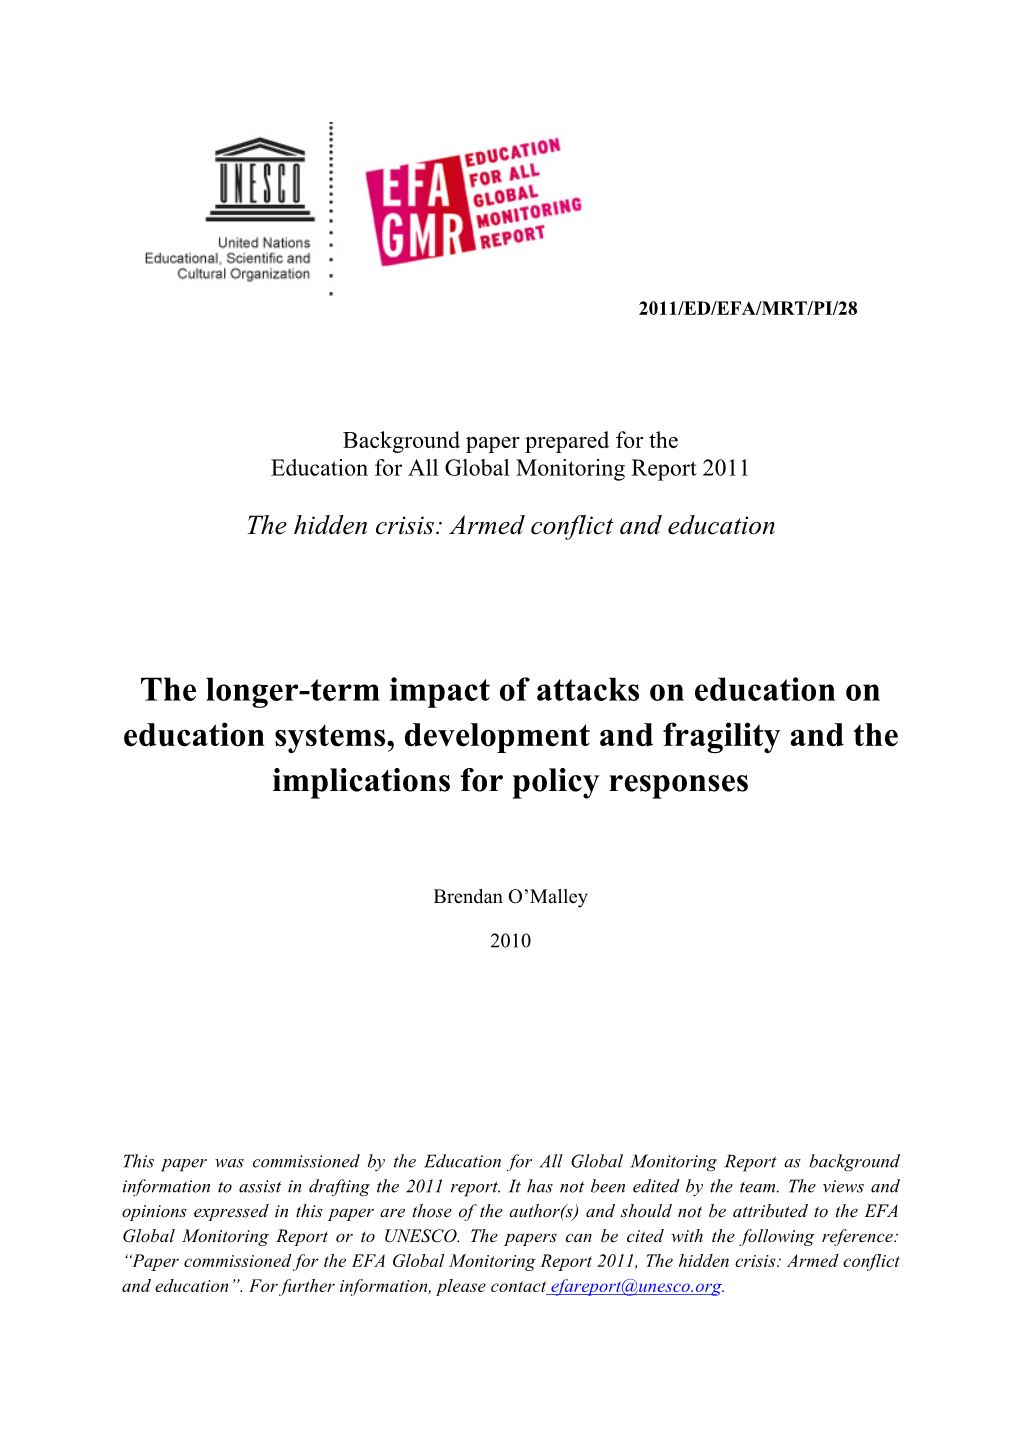 The Longer-Term Impact of Attacks on Education on Education Systems, Development and Fragility and the Implications for Policy Responses